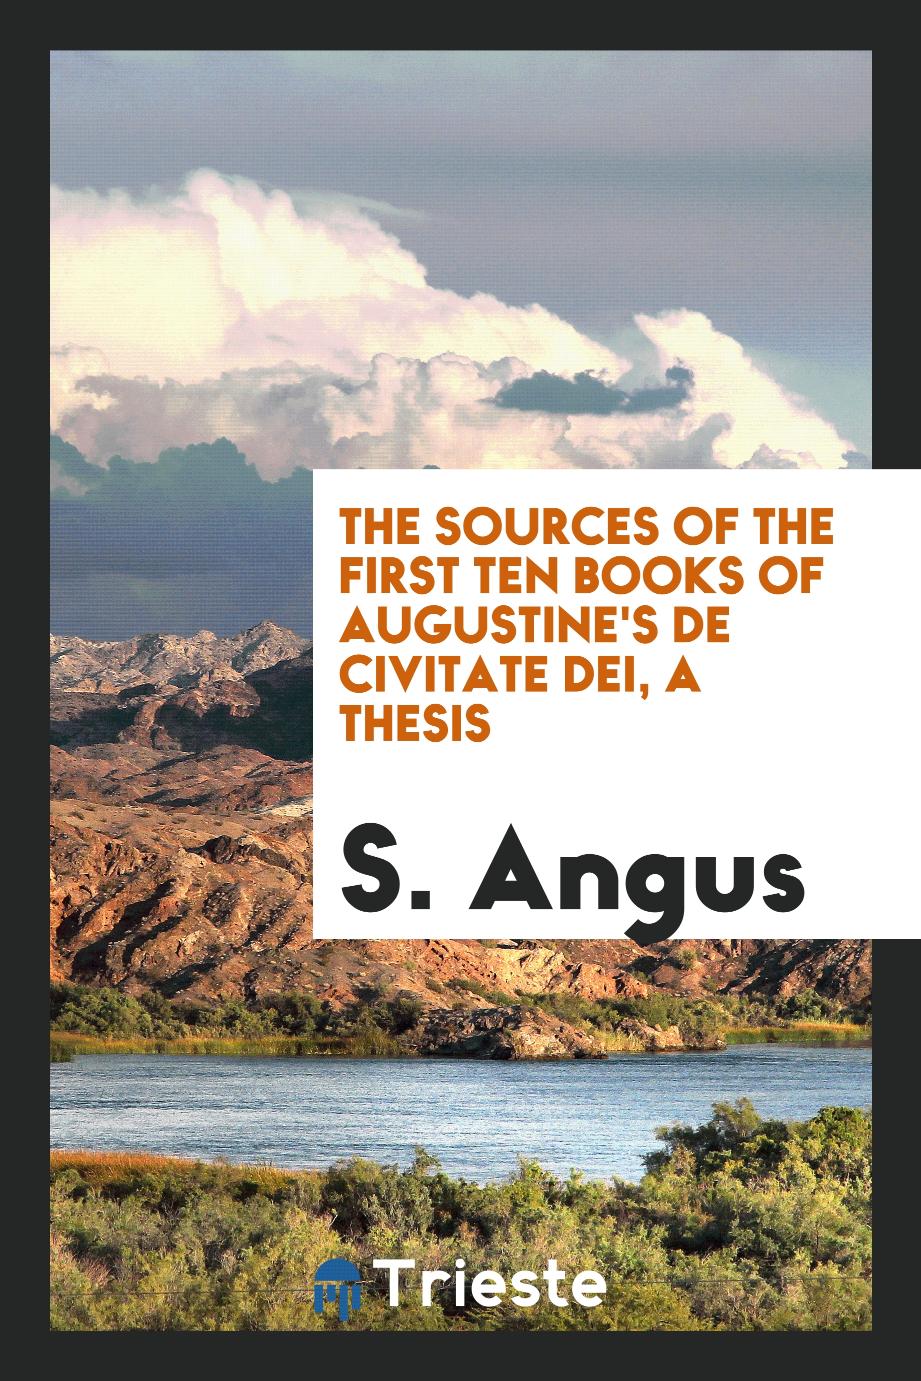 The sources of the first ten books of Augustine's De civitate dei, a thesis